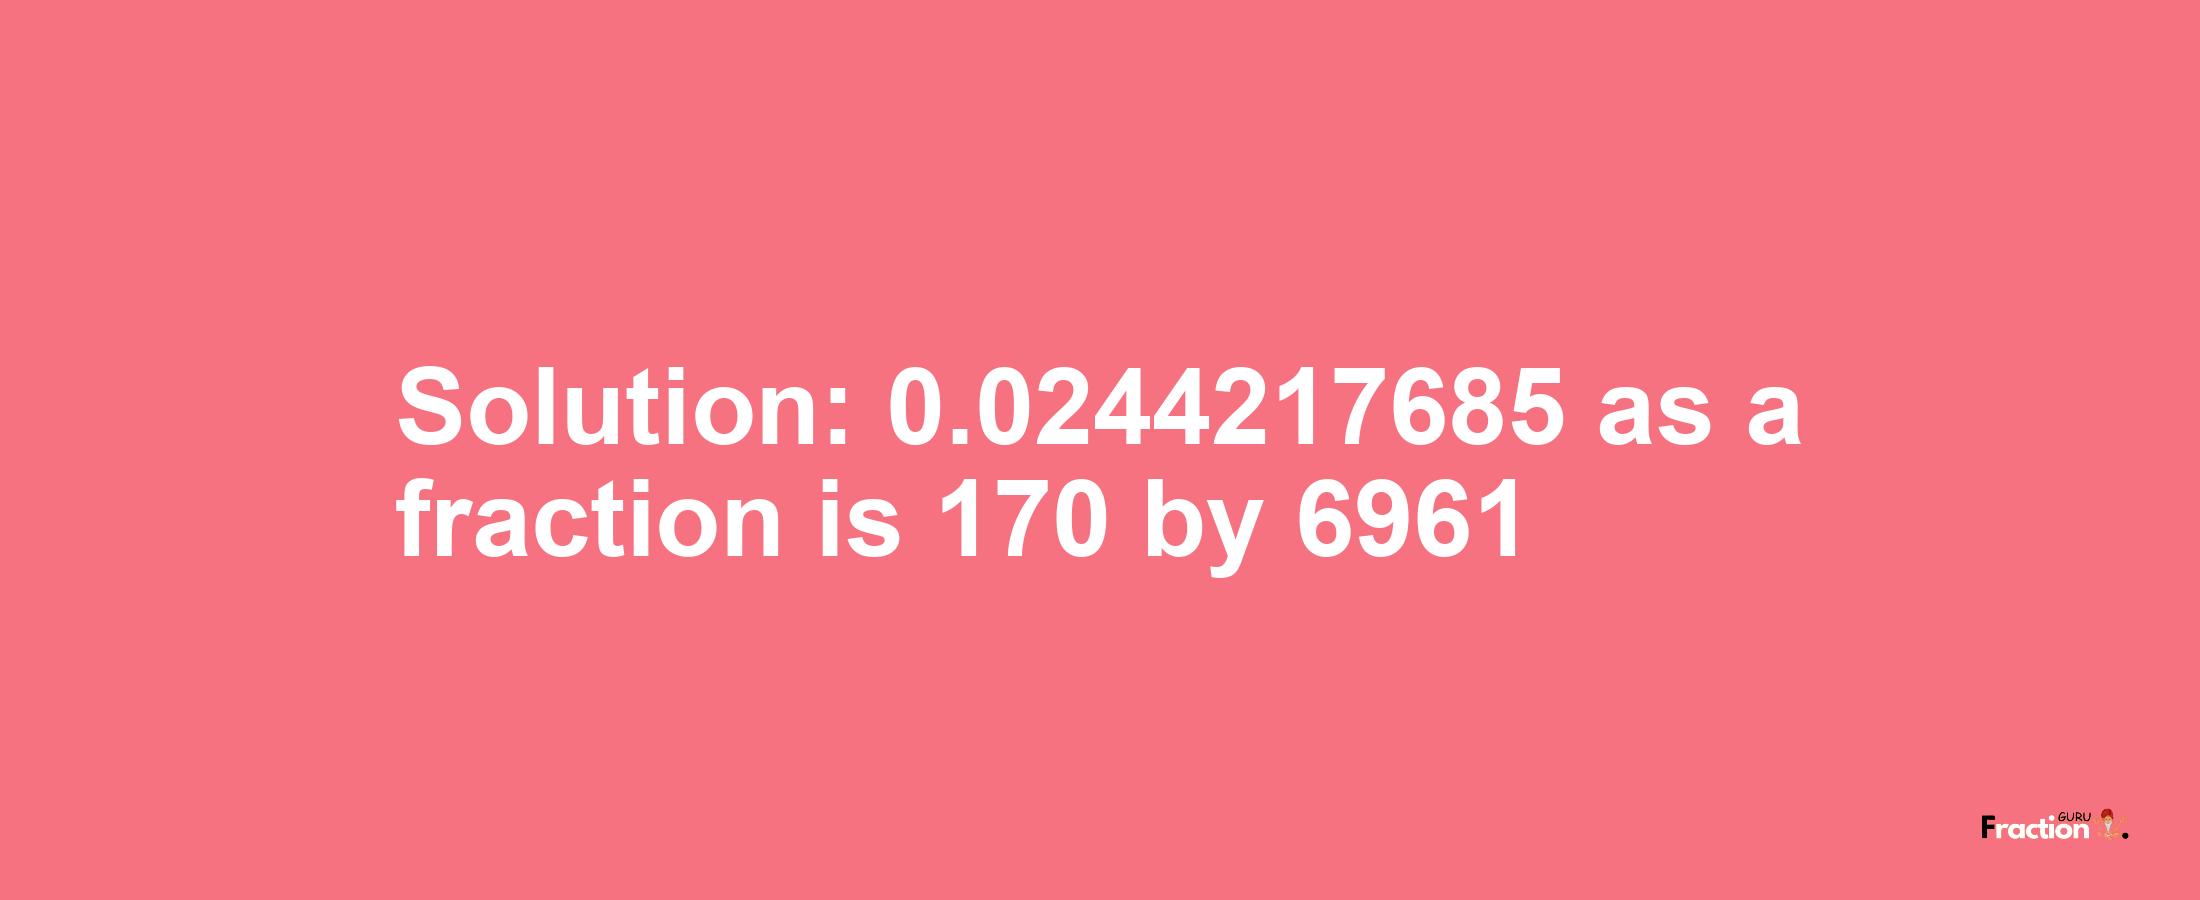 Solution:0.0244217685 as a fraction is 170/6961